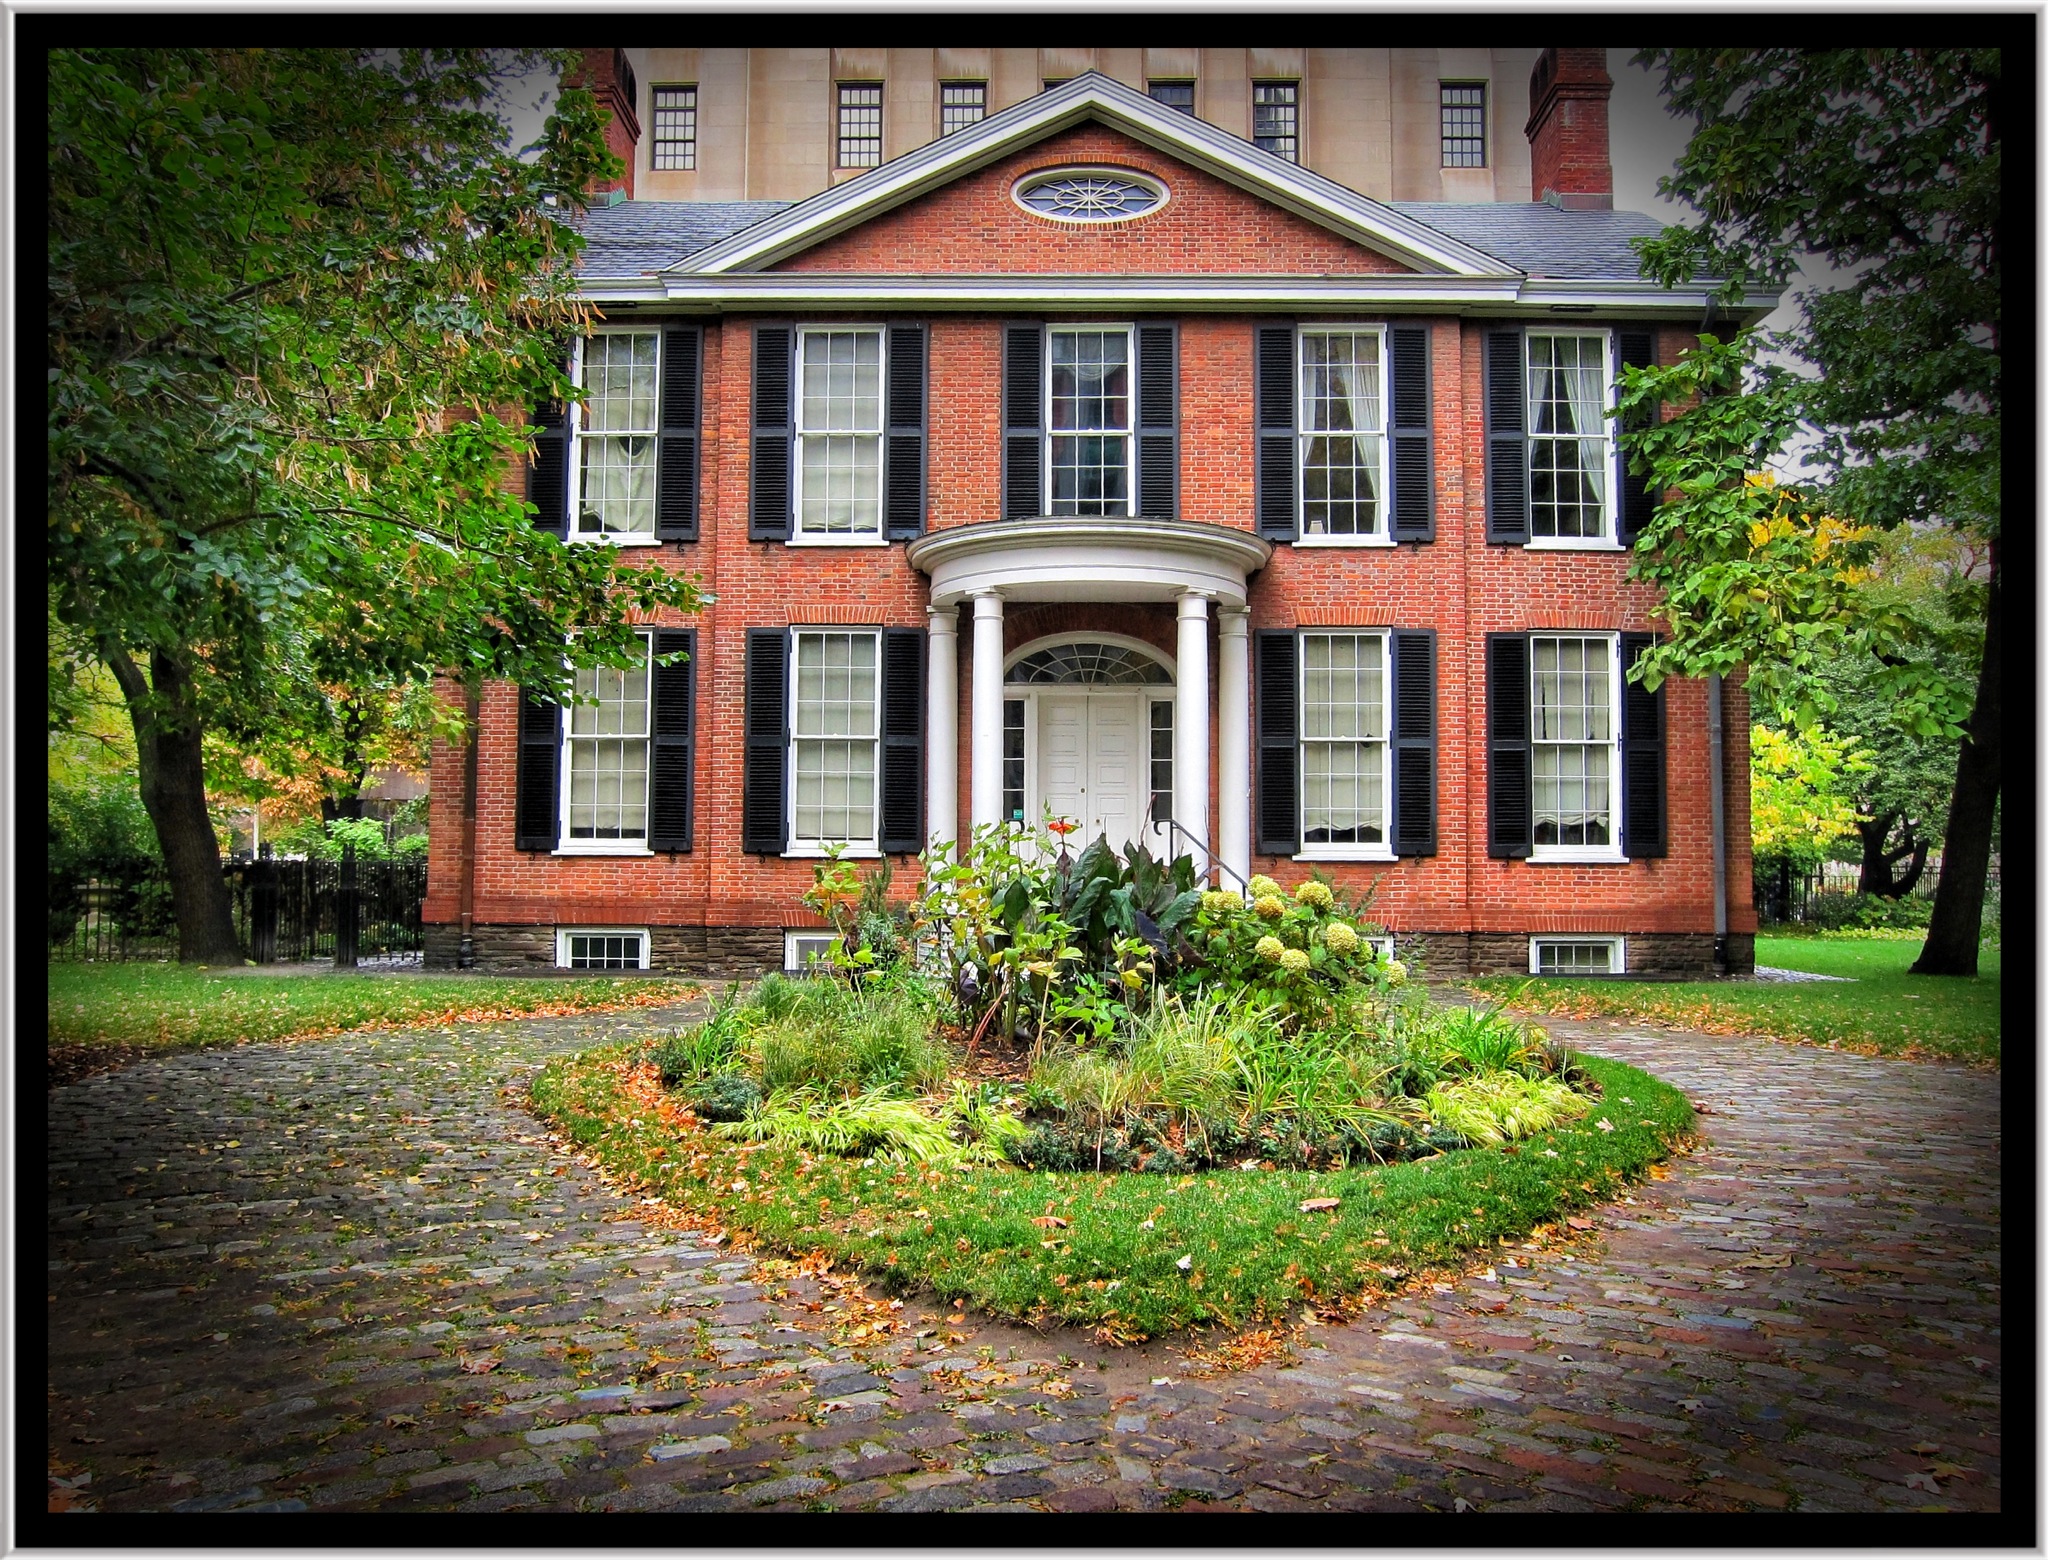 Toronto Ontario Canada ~ Campbell House ~ One of the few Photos I have taken of "my city" for flickr recently.